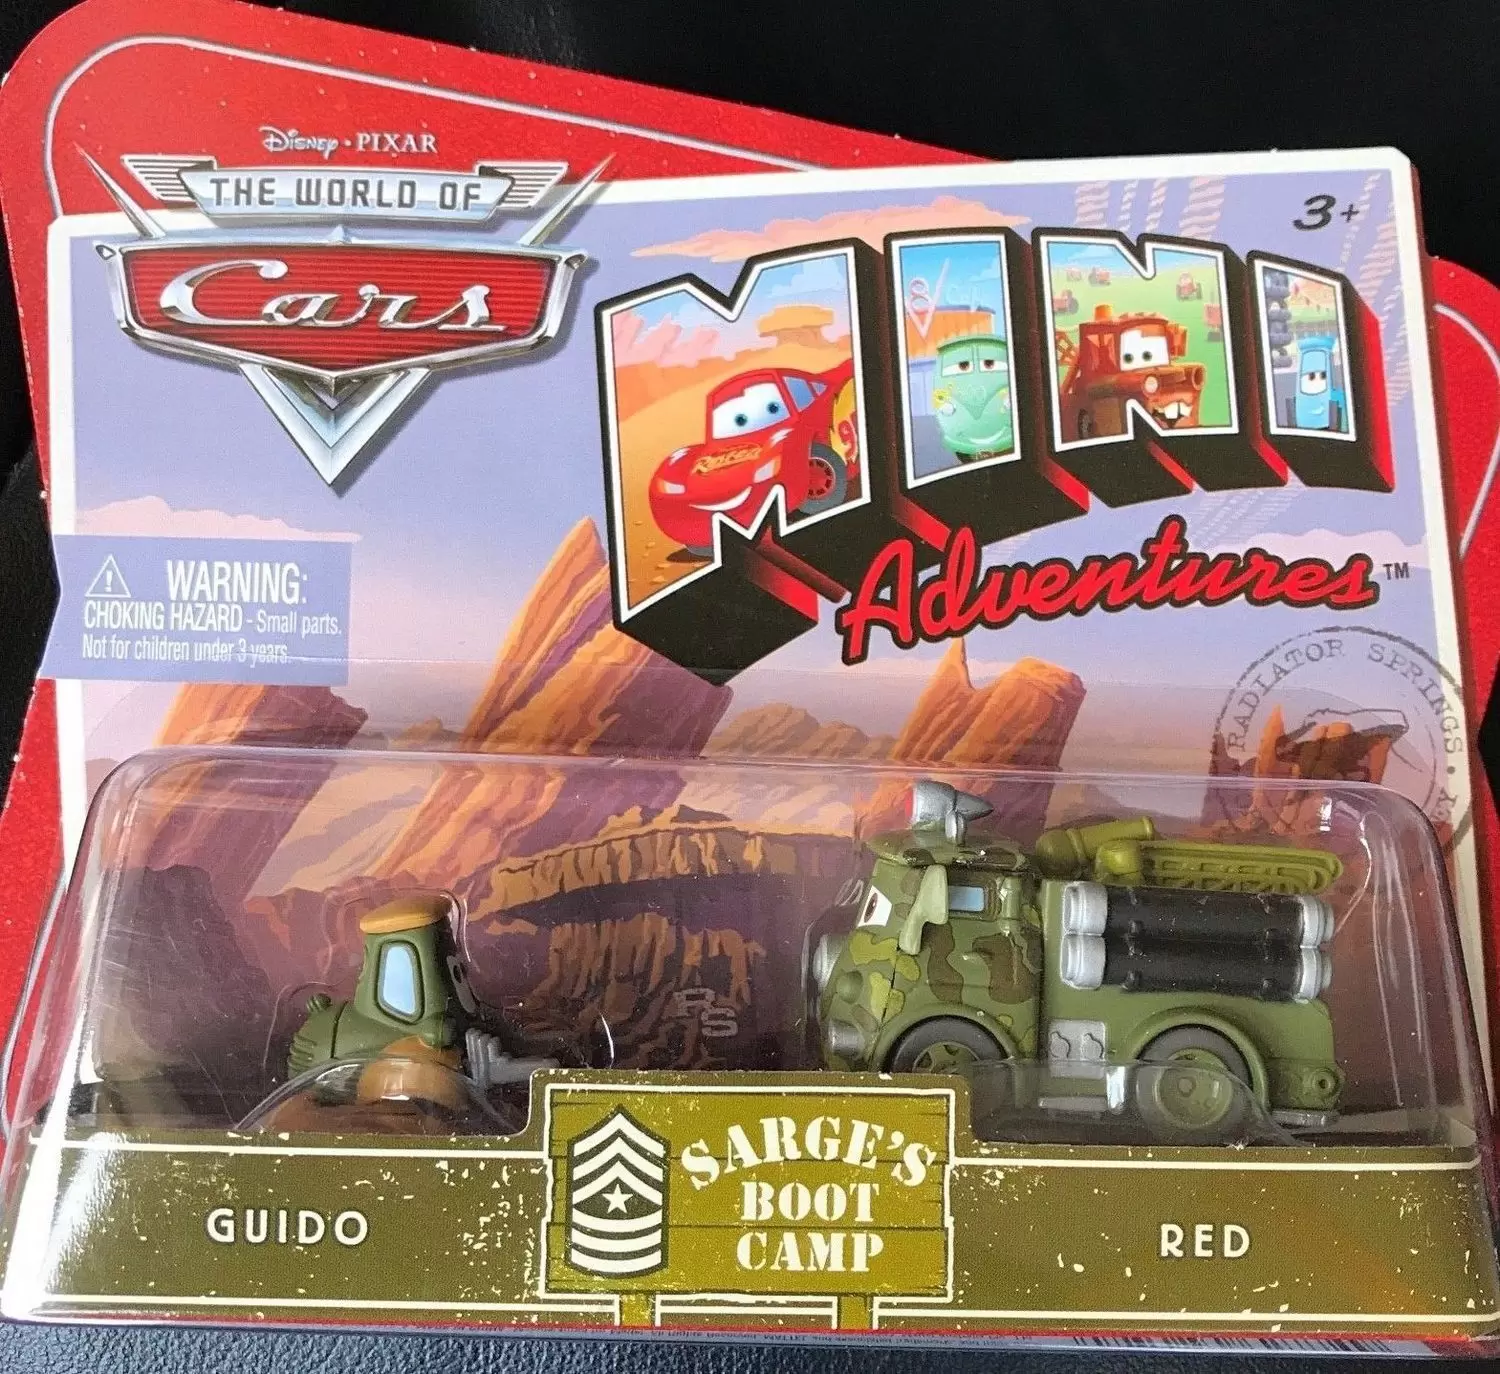 Mini Adventure cars - Sarge’s Boot Camp - Guido & Red